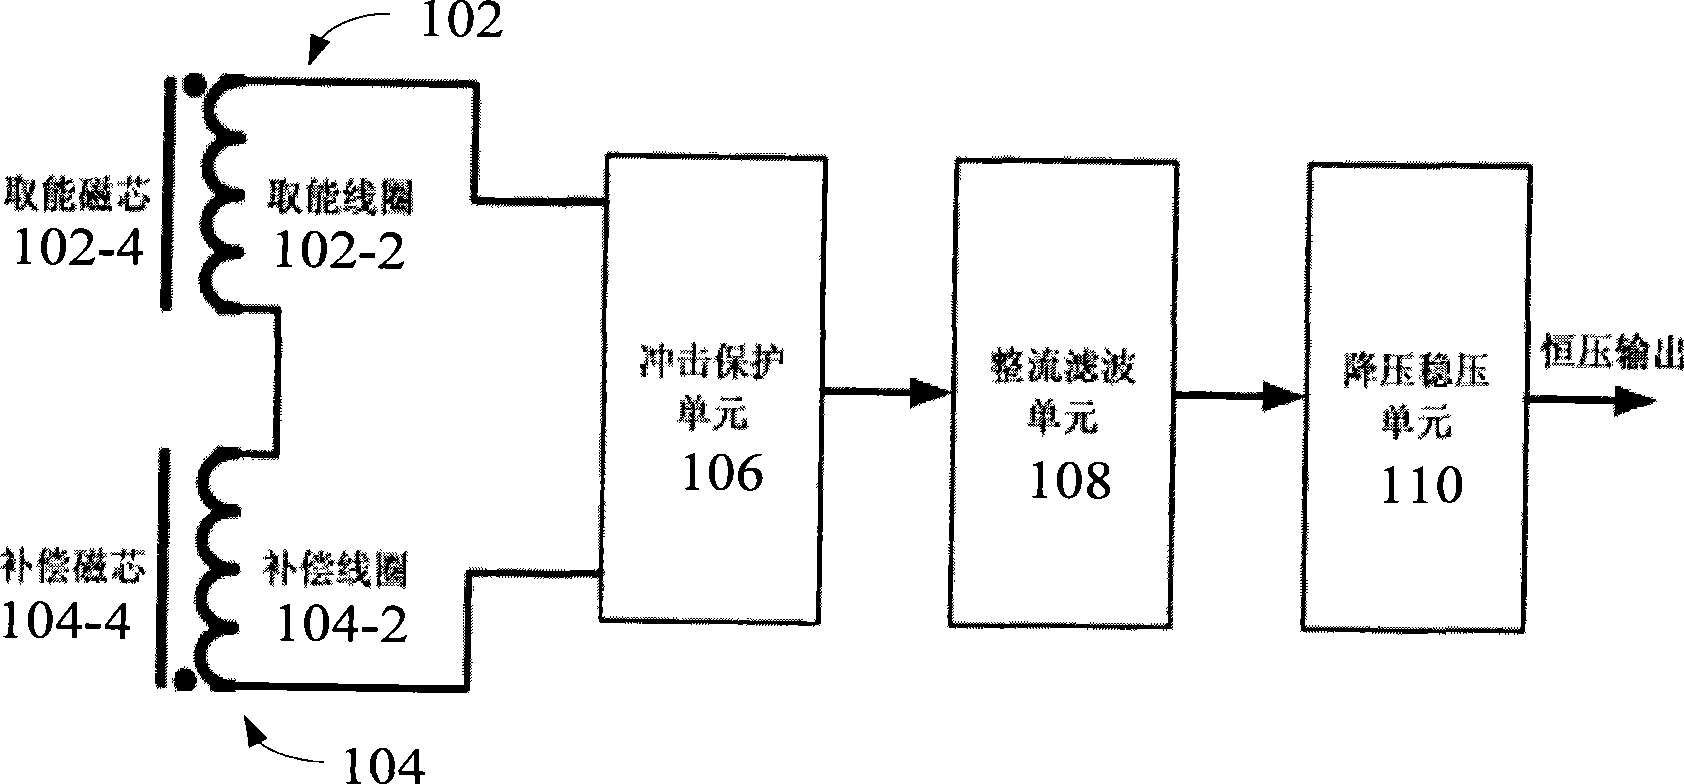 High voltage induction energy fetching power supply and method for obtaining power from high voltage line